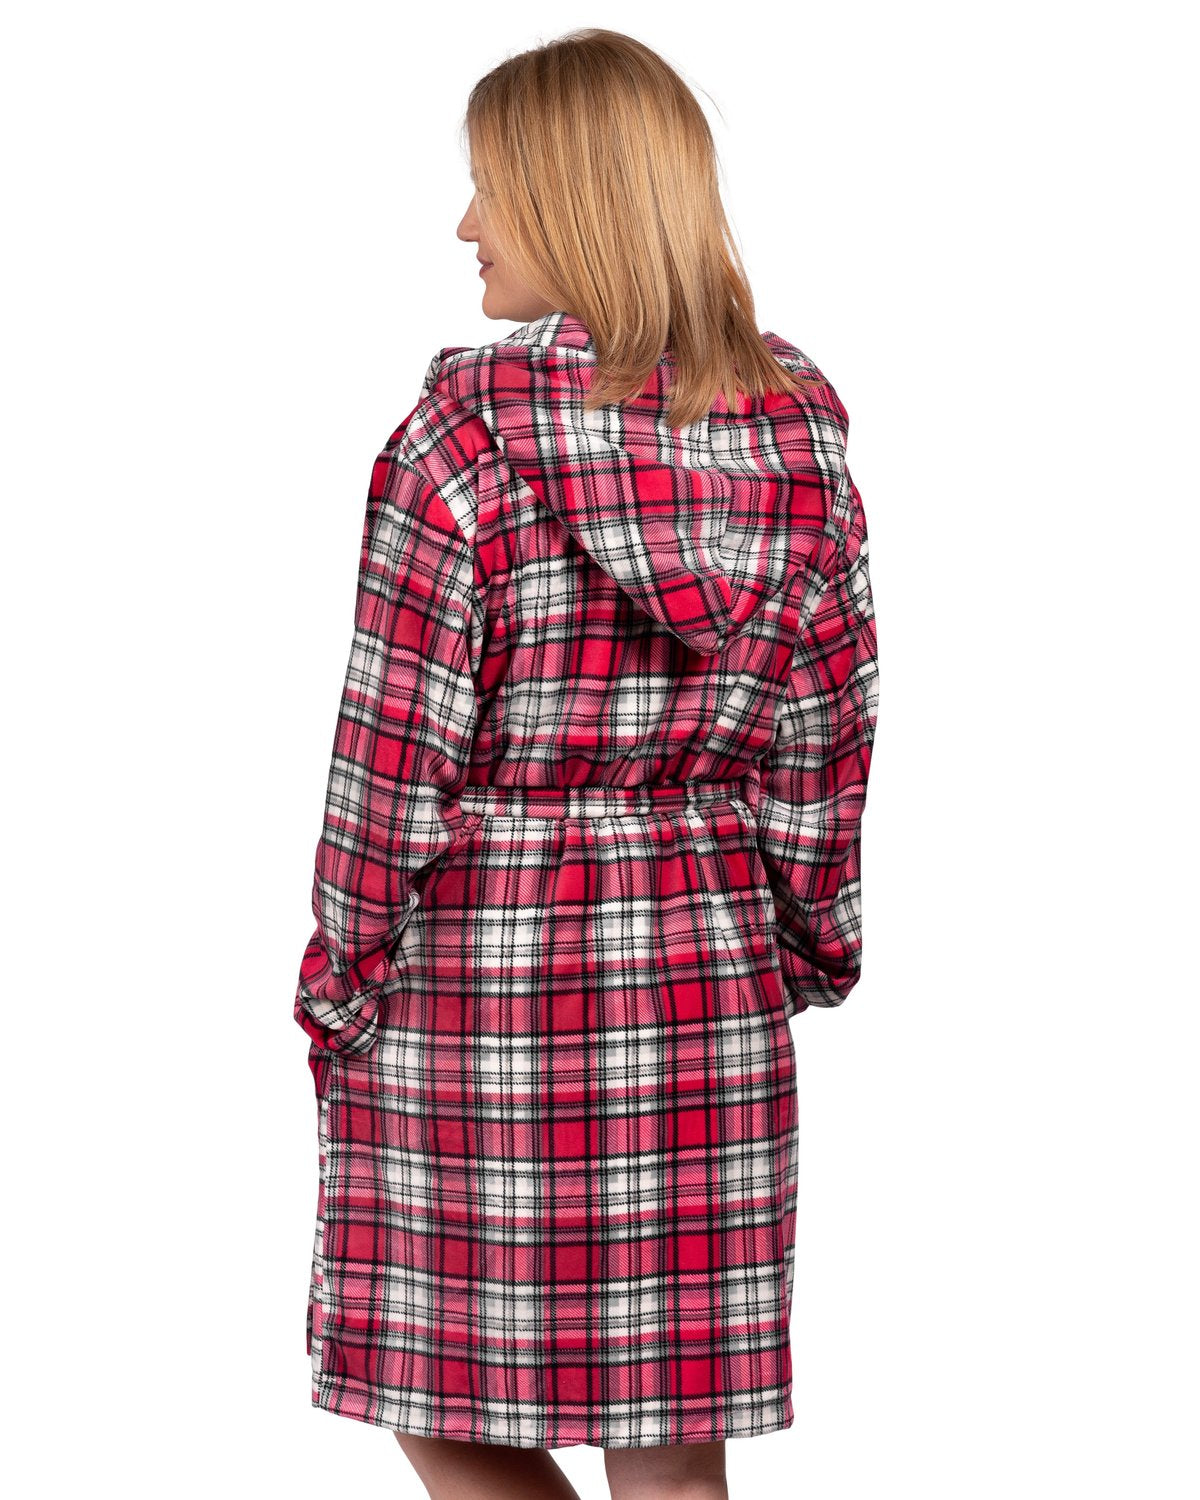 Coffee Shoppe Stay-at-Home Hooded Lounge Robe - Deep Red Tartan